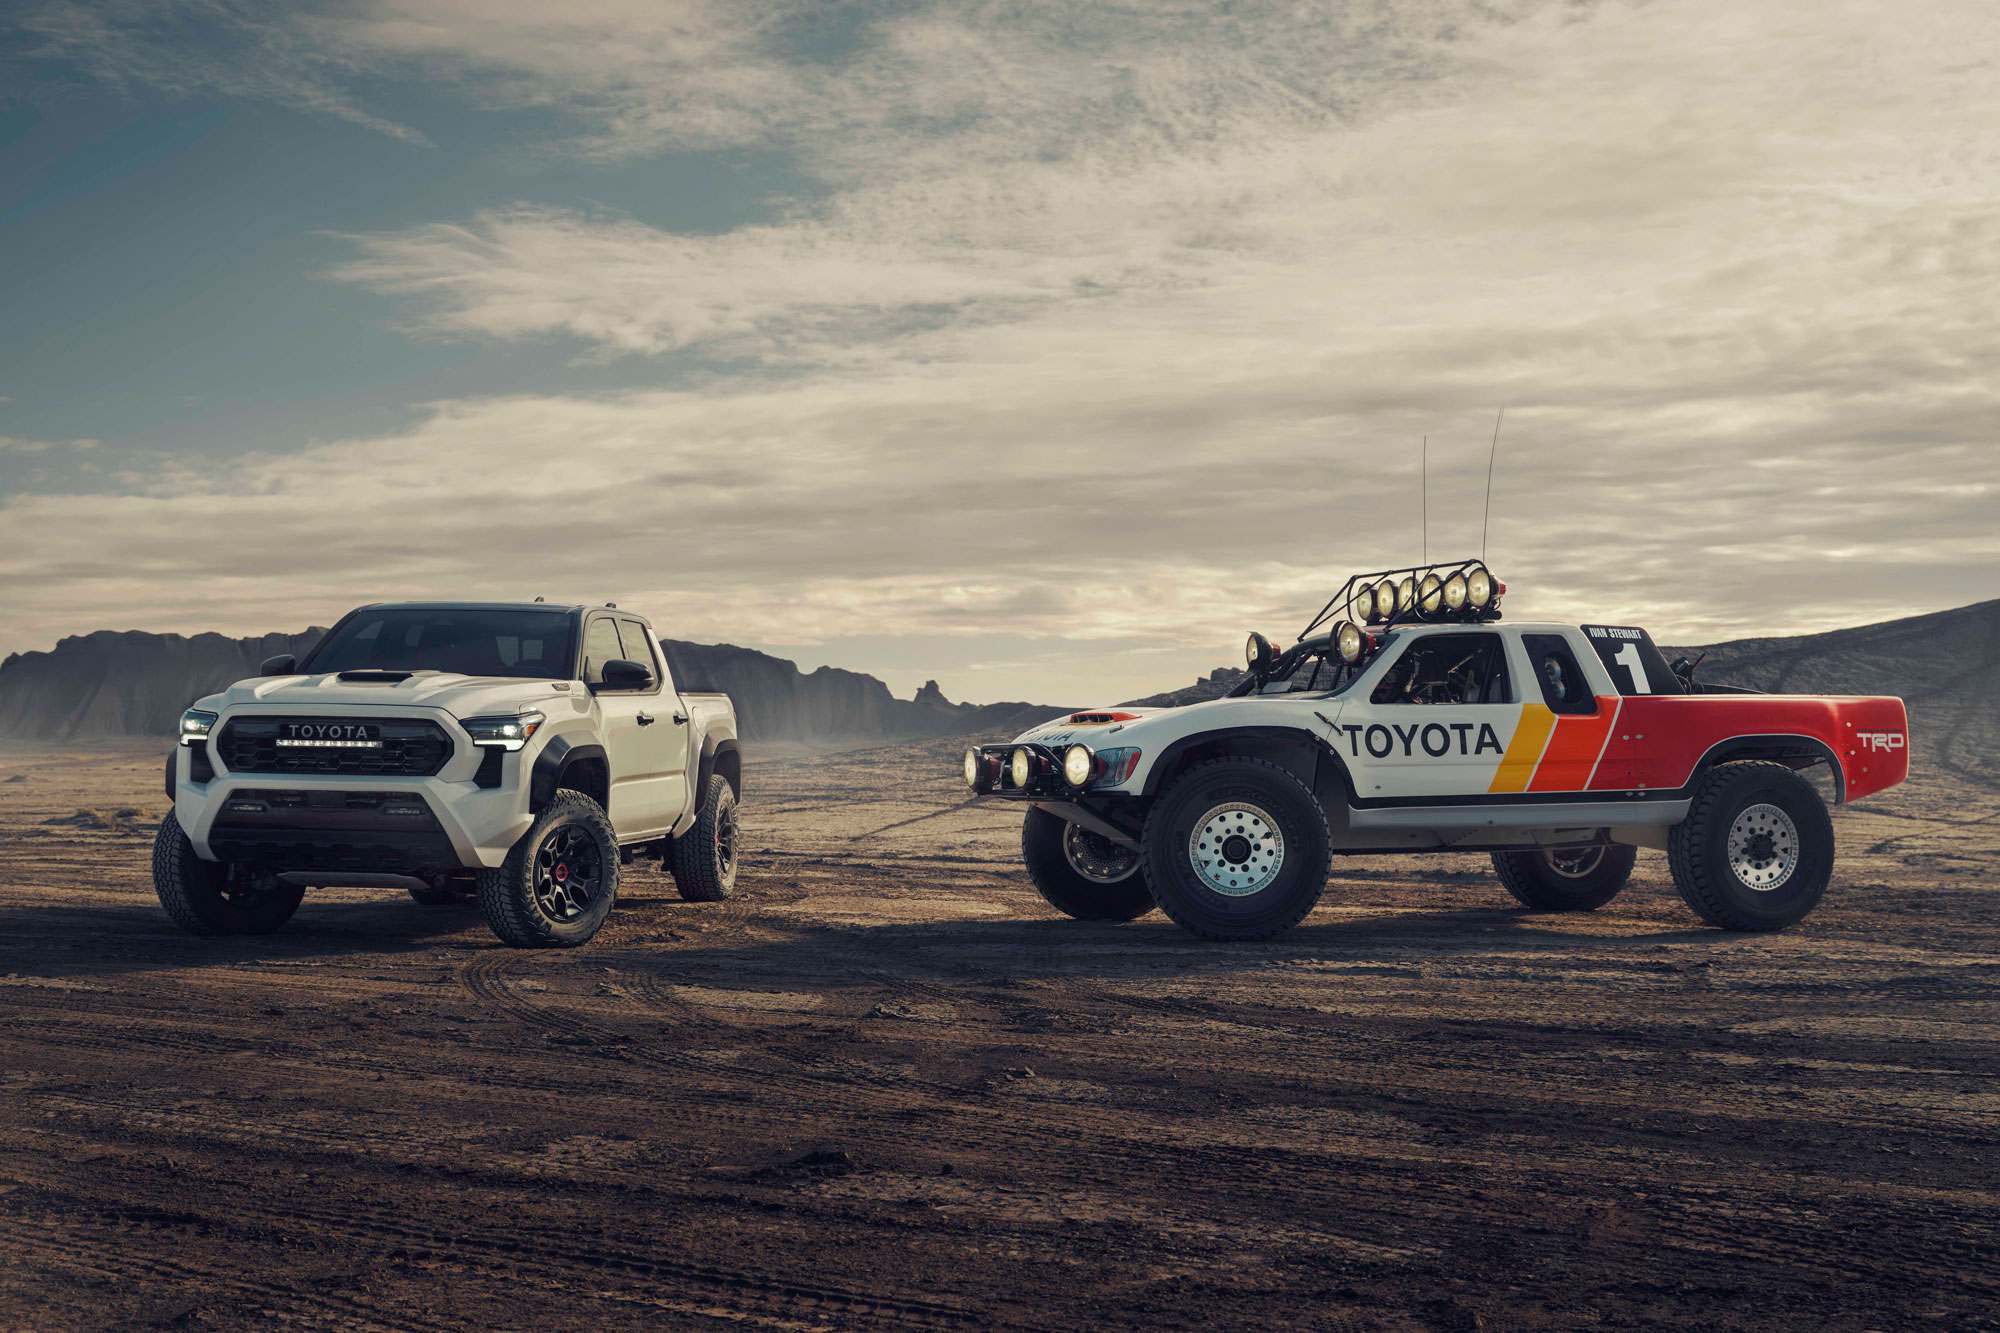 2024 Toyota Tacoma and vintage Toyota off-road race truck.